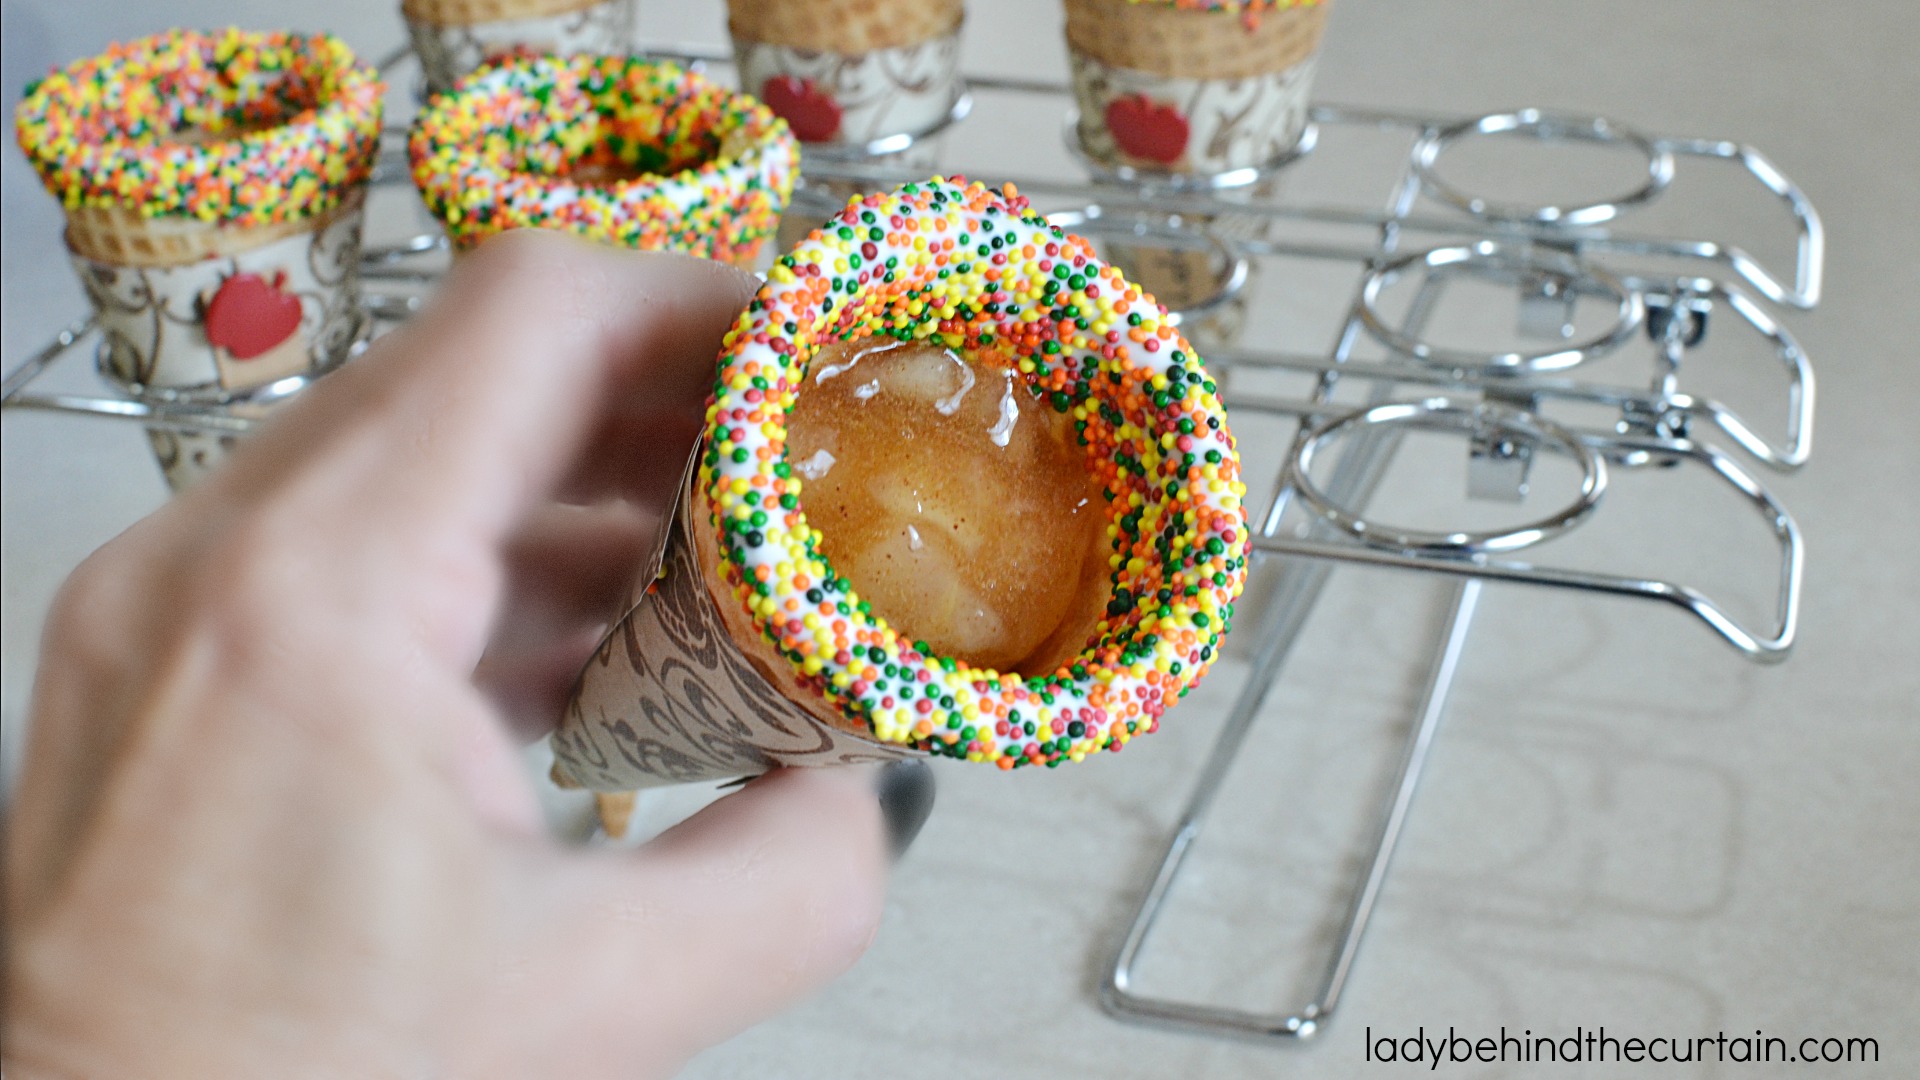 Apple Pie Cheesecake Filled Cones | These fun cones are filled with delicious fluffy cheesecake and little pockets of apple pie filling. A fun and easy was to serve your guests no bake cheesecake!